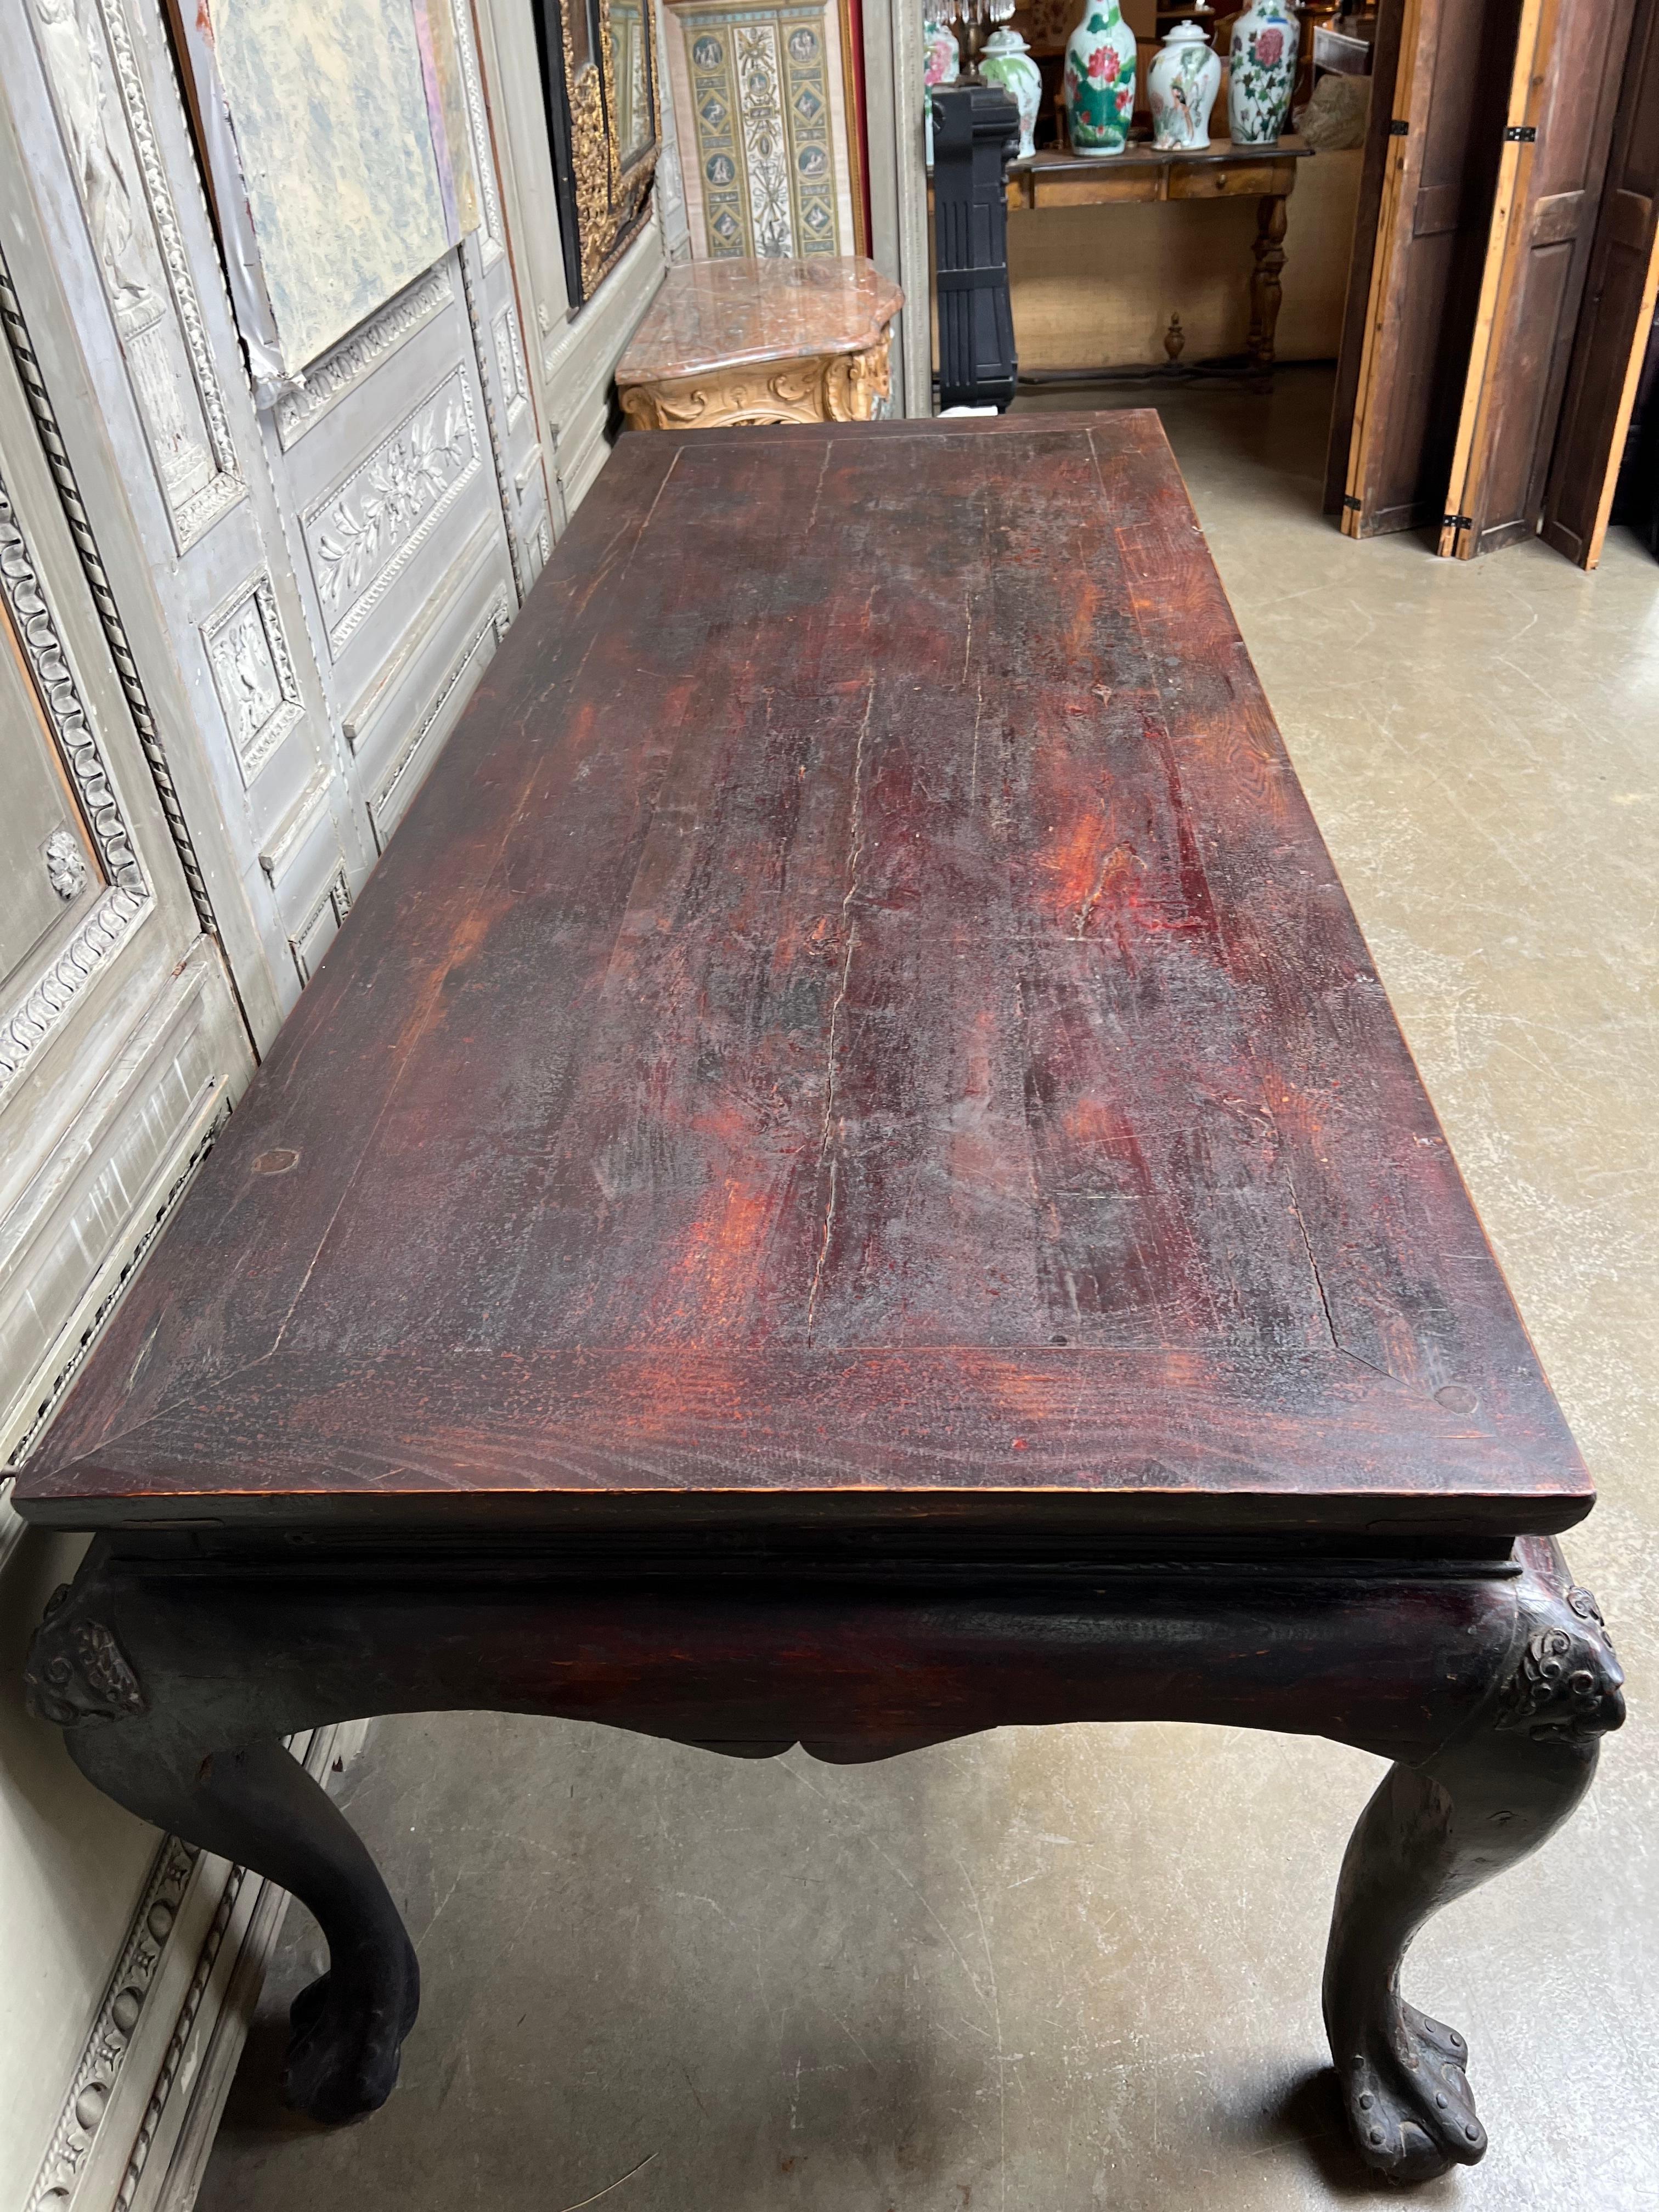 Hand-Carved Large 19th Century Elmwood Table with an Old Lacquer Finish For Sale